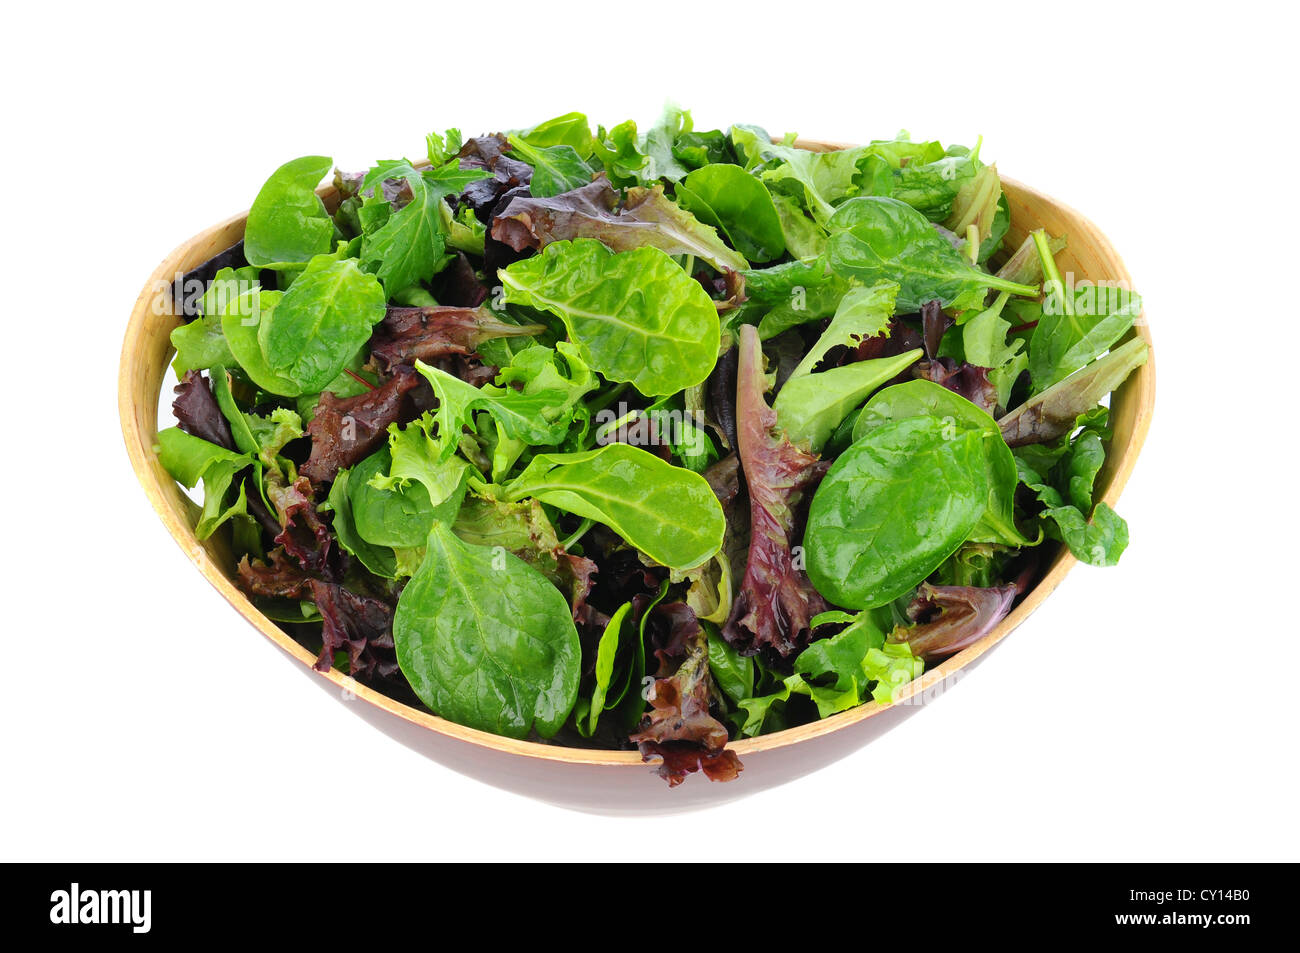 A Wooden bowl full of assorted salad greens, including, spinach, arugula, and romaine. Horizontal format on a white background. Stock Photo